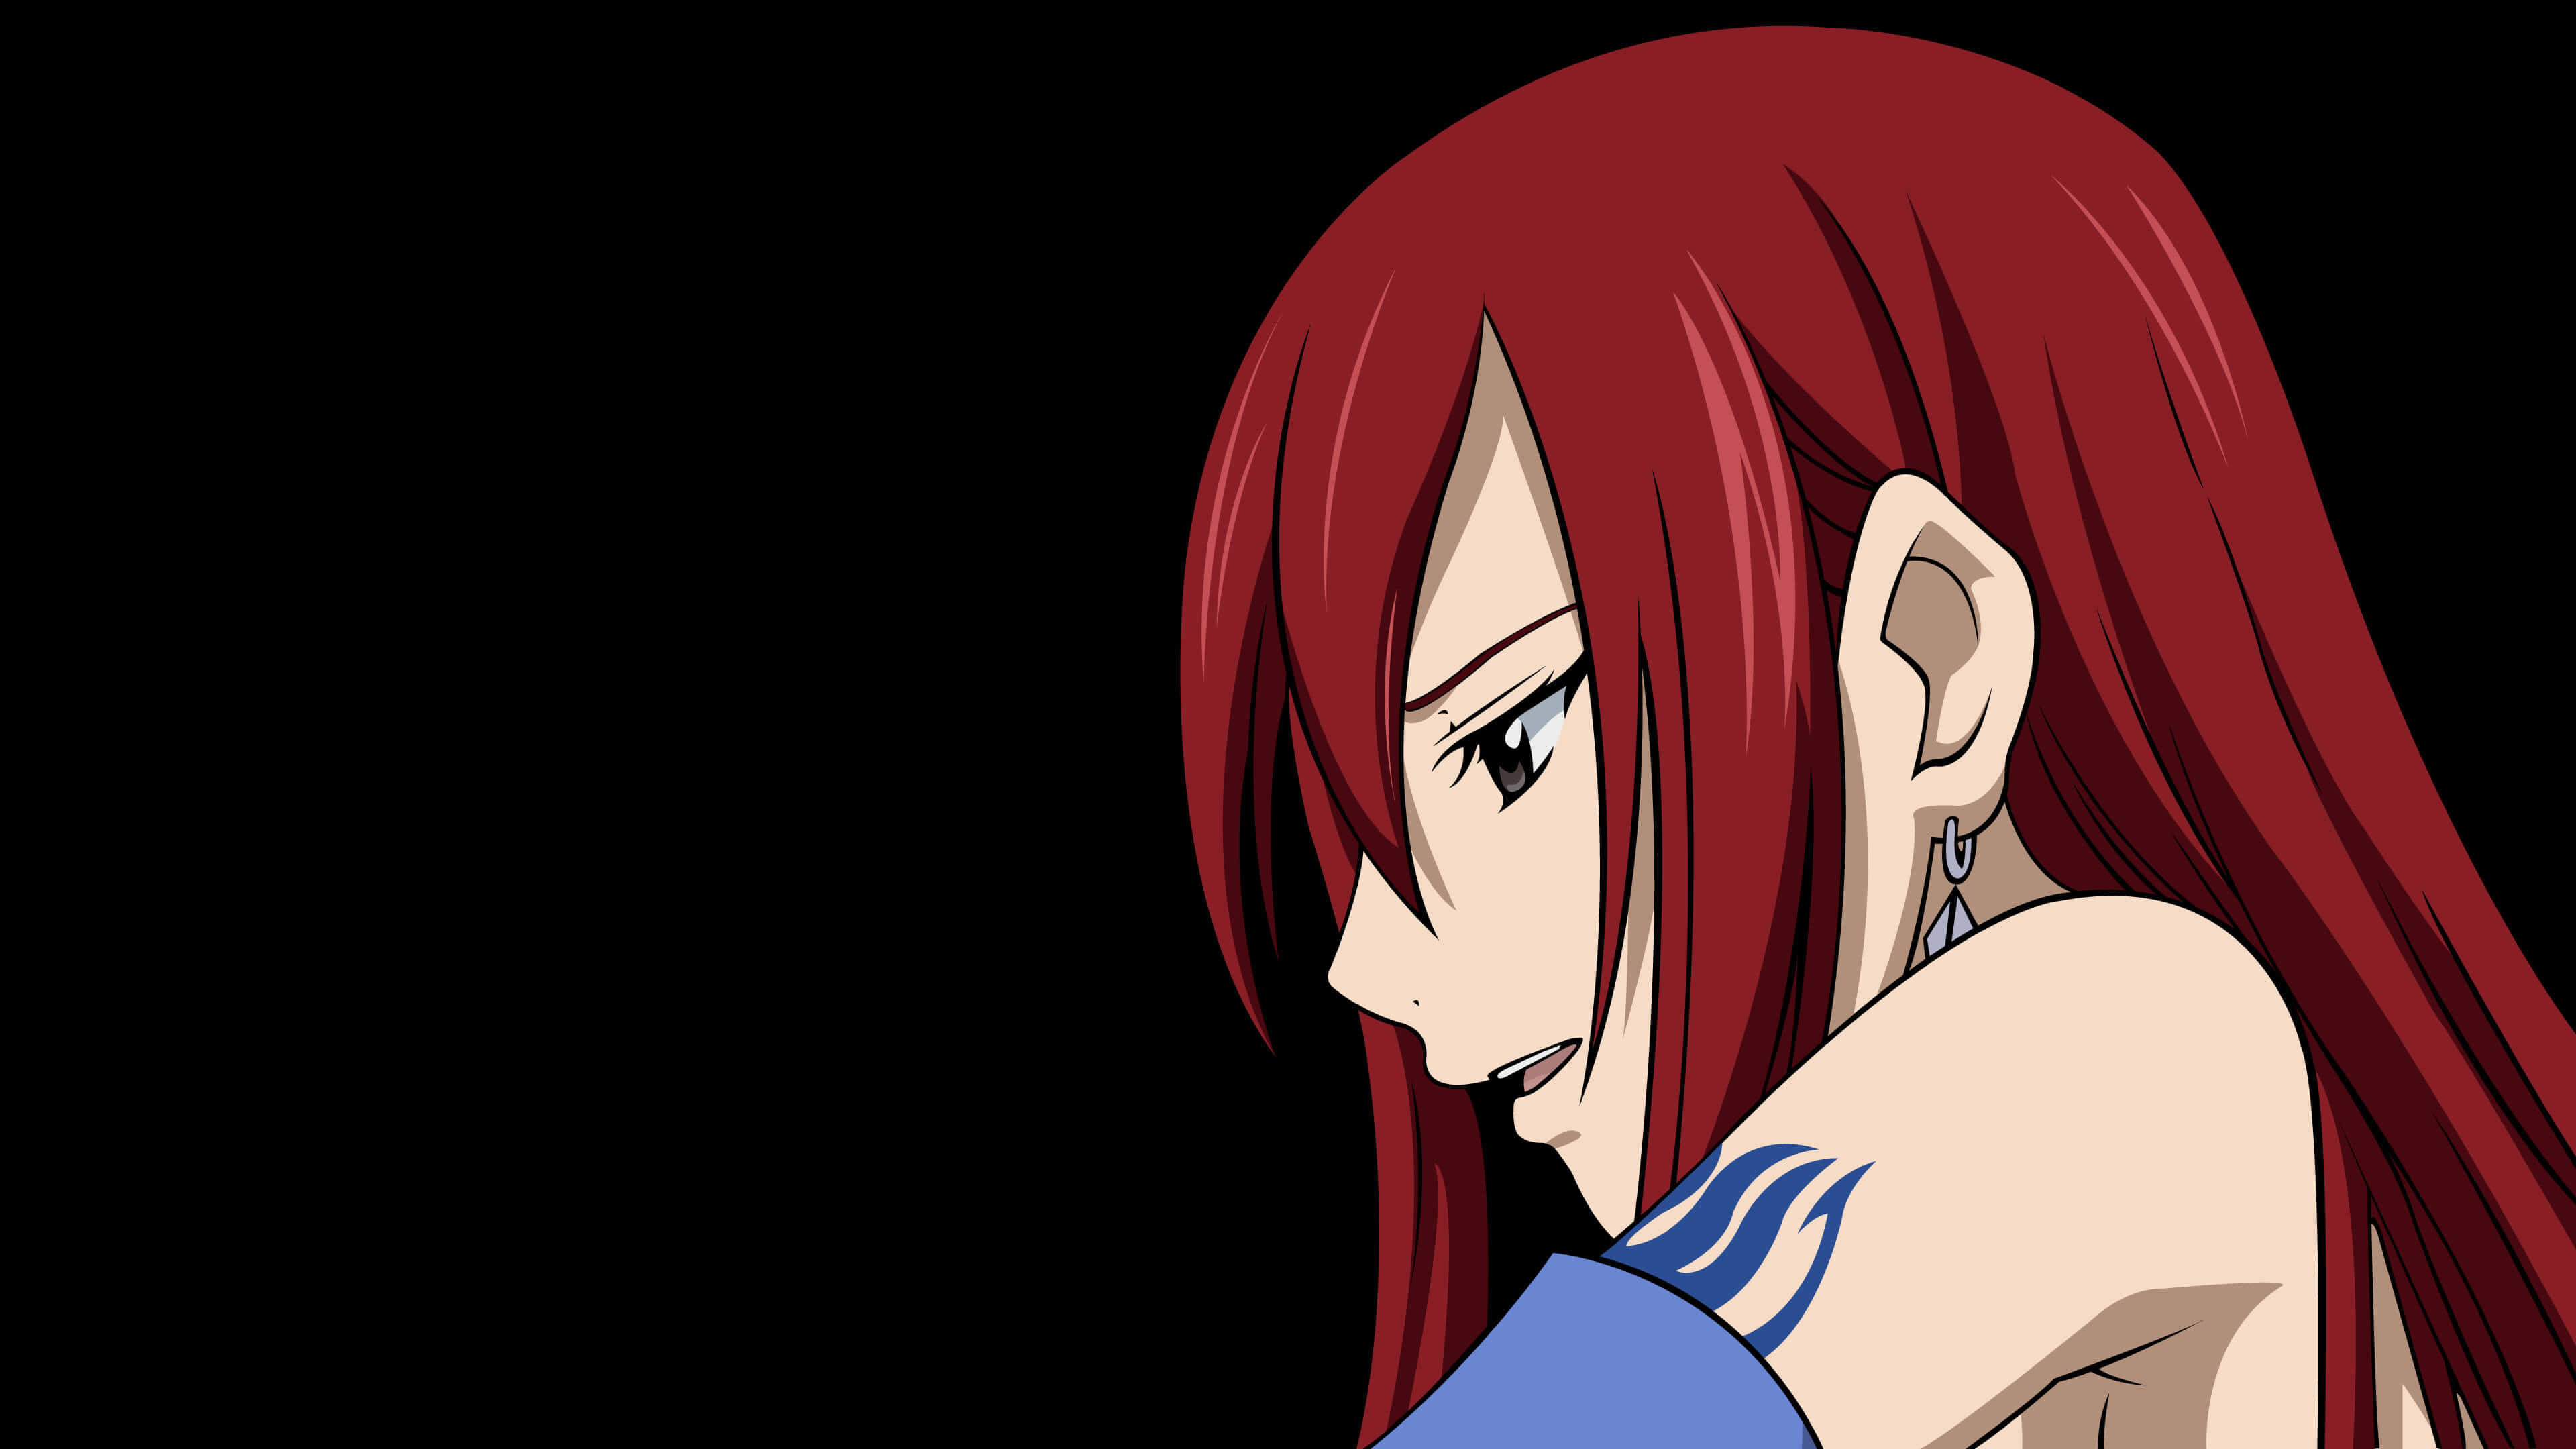 3840x2160 Fairy Tail Erza Scarlet. Rate Wallpaper. DOWNLOAD IMAGE